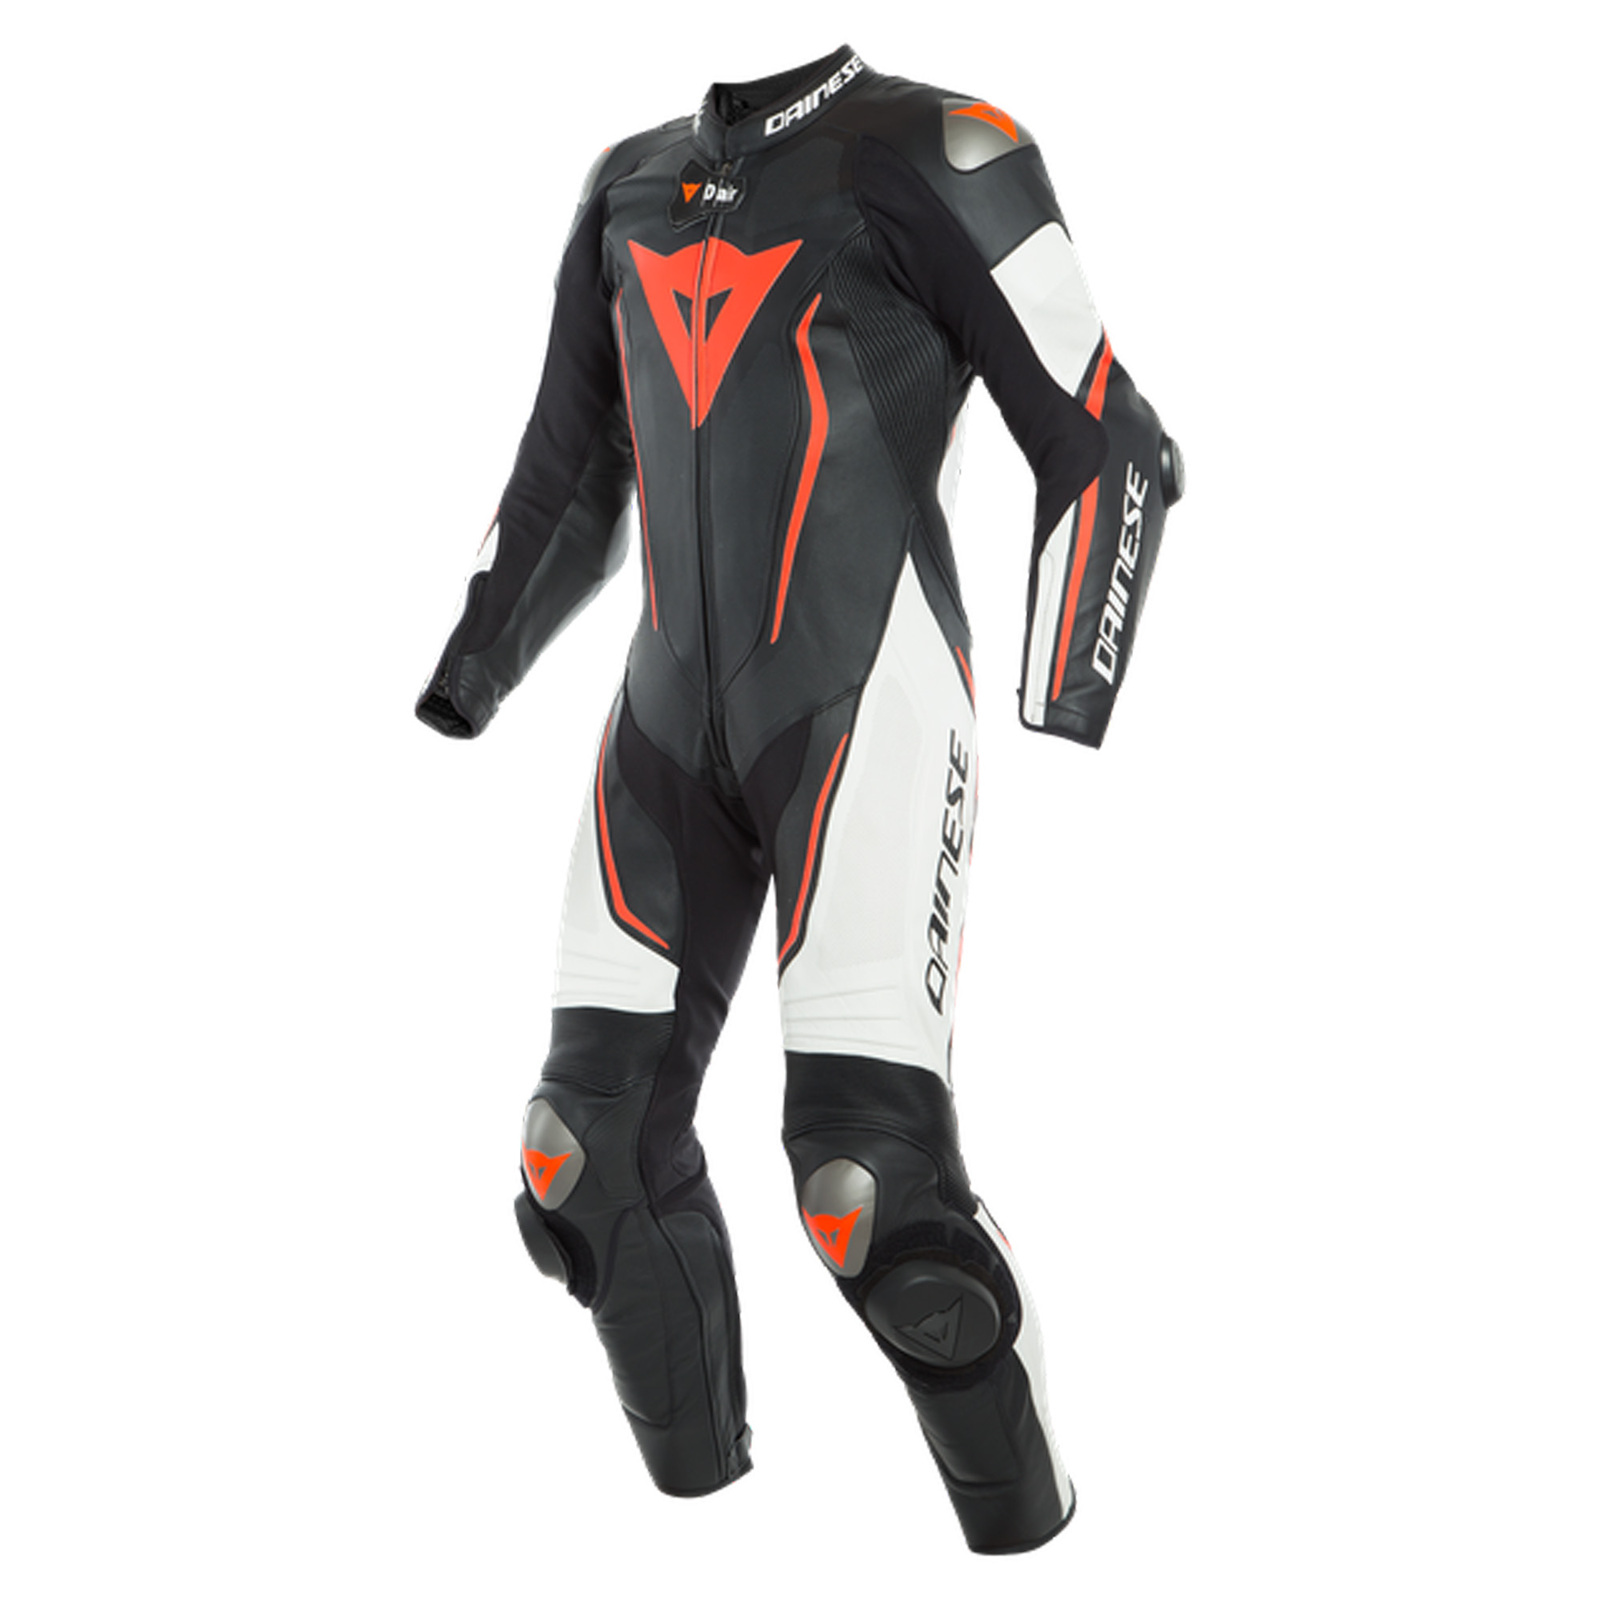 MISANO 2 D-AIR 1PC PERF. SUIT BLACK/WHITE/FLUO-RED/56